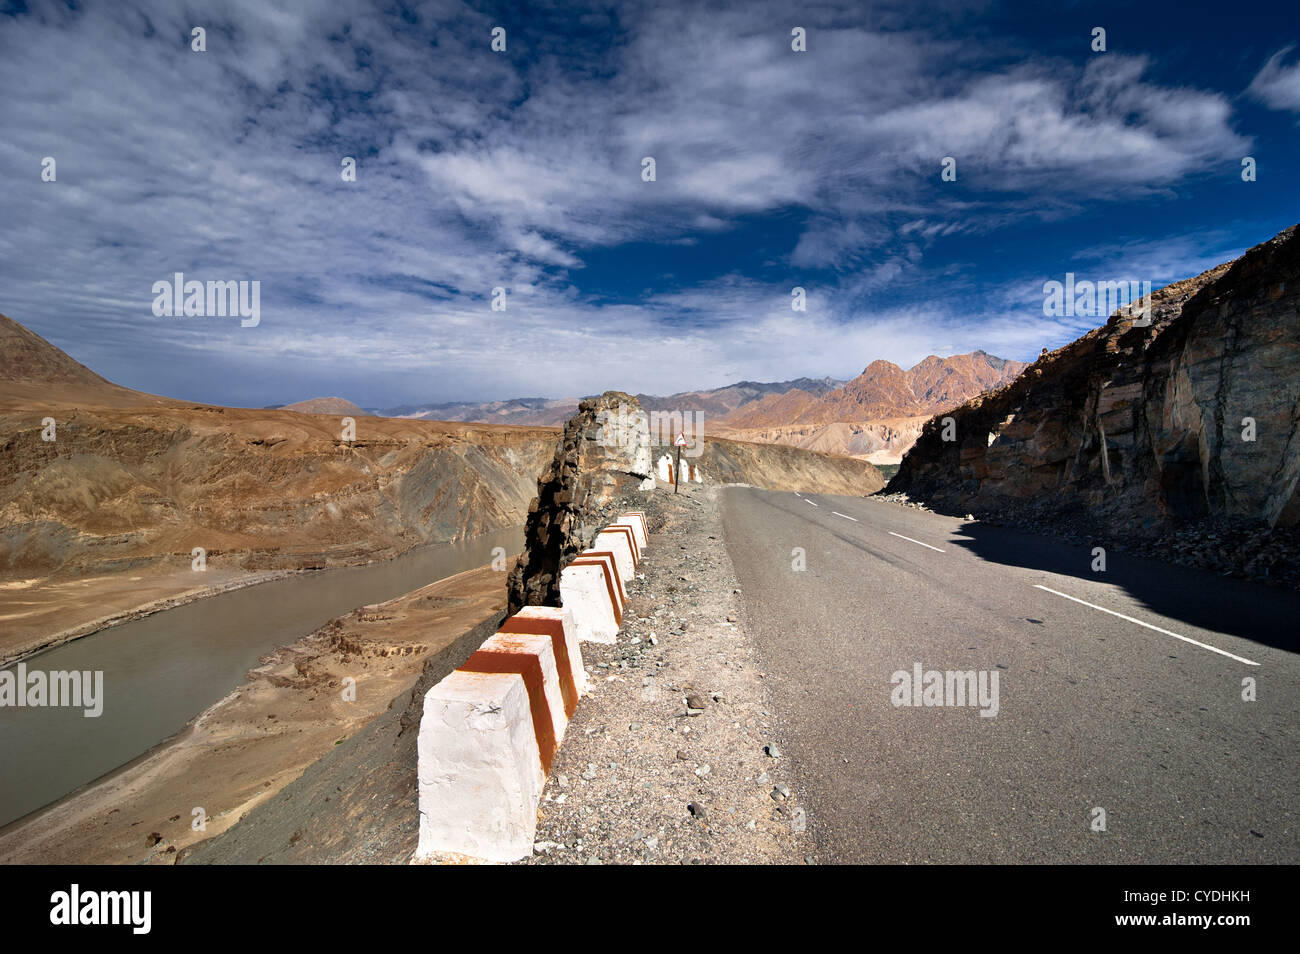 Road going across Himalaya mountains along Indus river under blue cloudy sky. India, Ladakh, altitude 3300 m Stock Photo